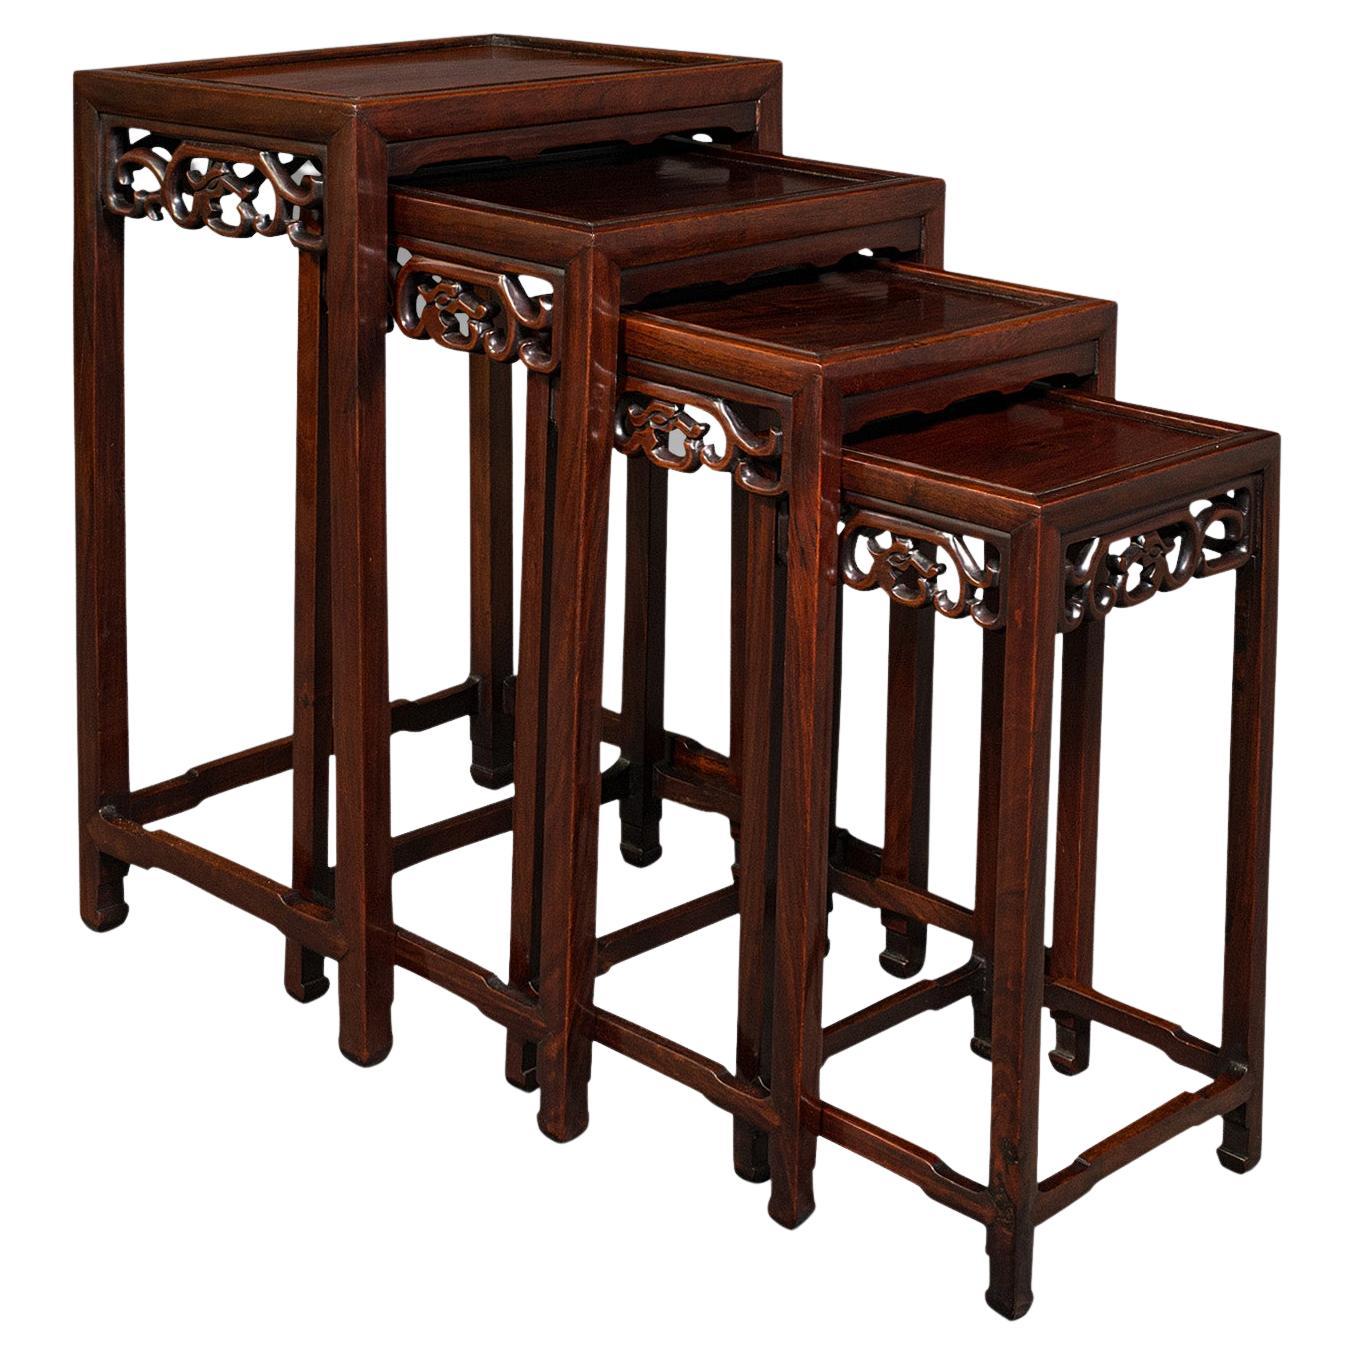 Antique Quartetto Nesting Tables, Chinese, Occasional, Victorian, Circa 1900 For Sale